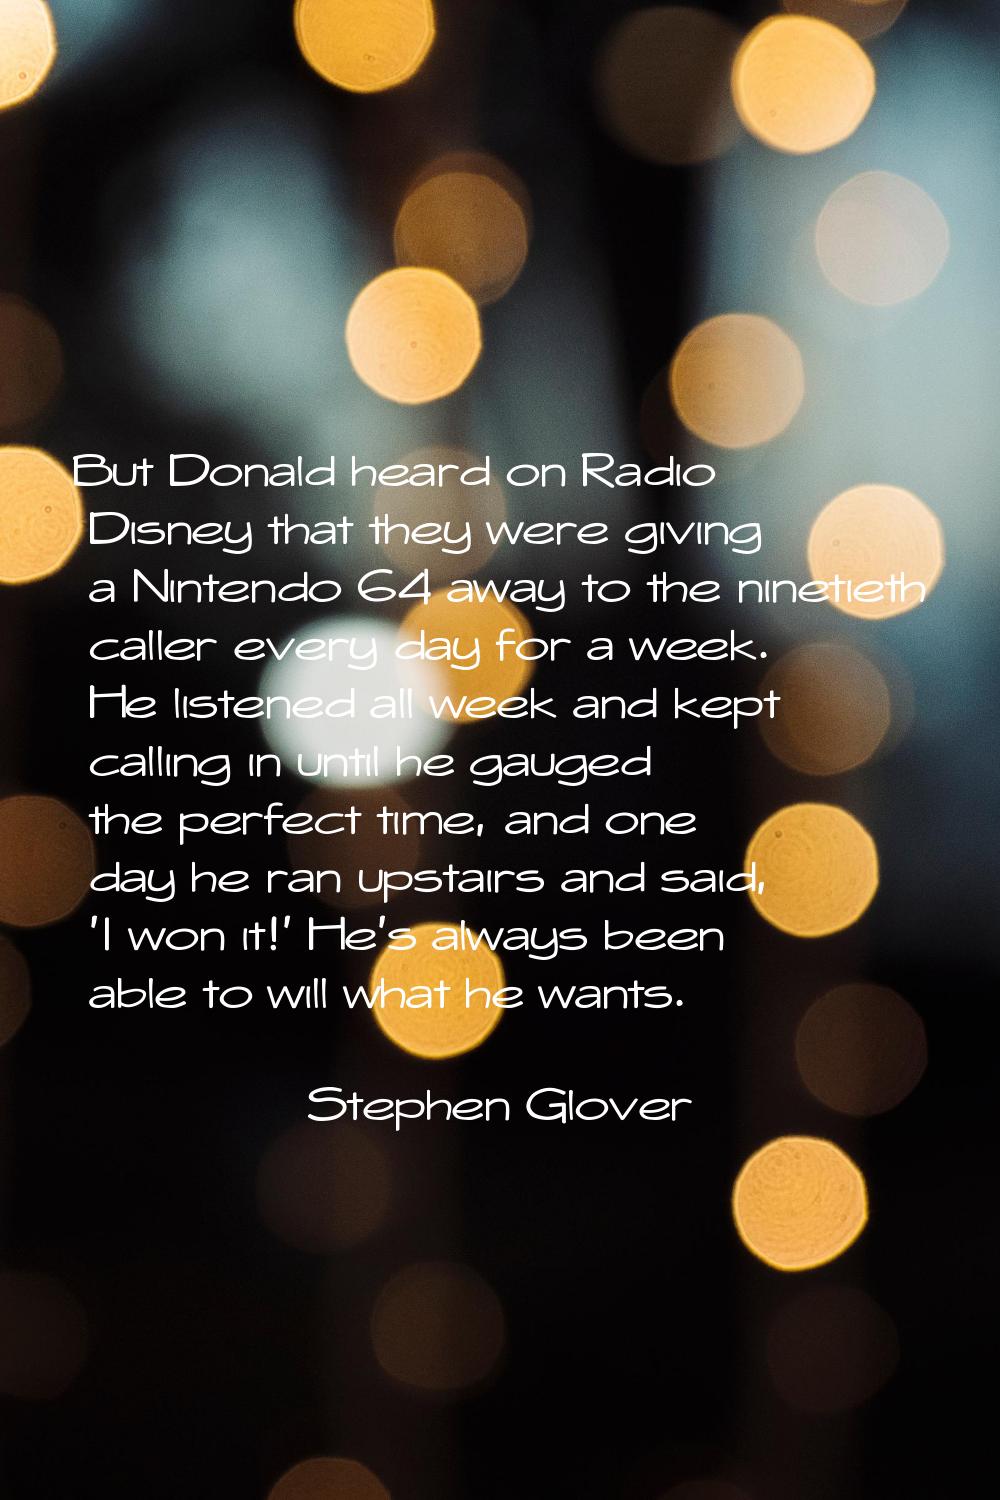 But Donald heard on Radio Disney that they were giving a Nintendo 64 away to the ninetieth caller e